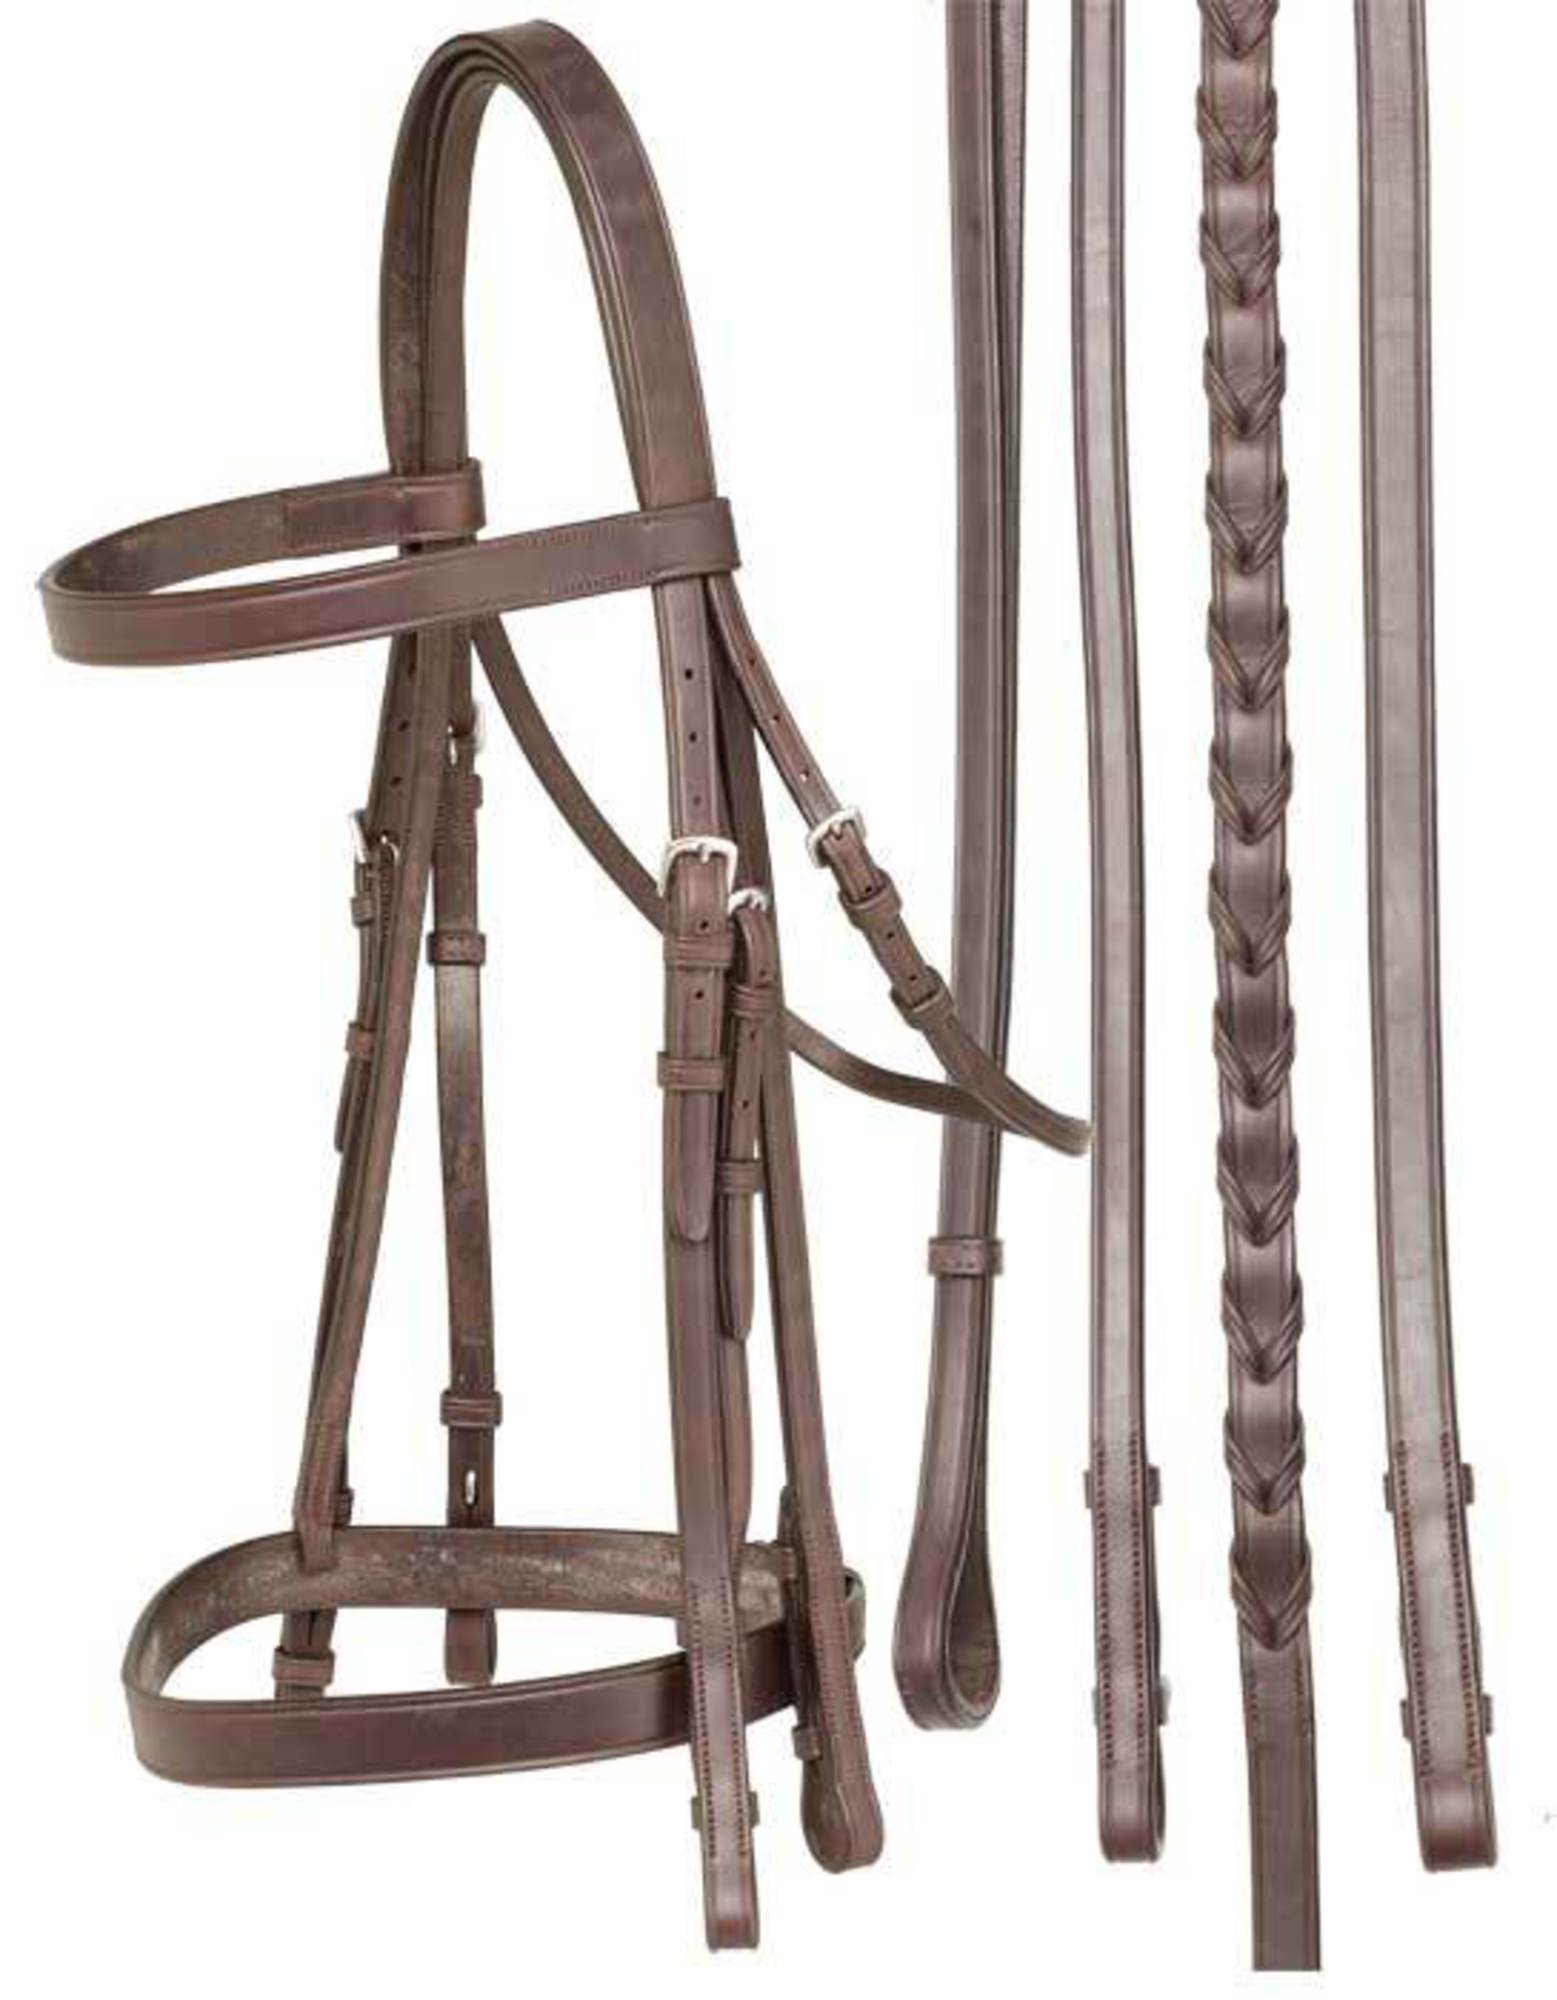 Oregon Weymouth Bridle - The Trading Stables